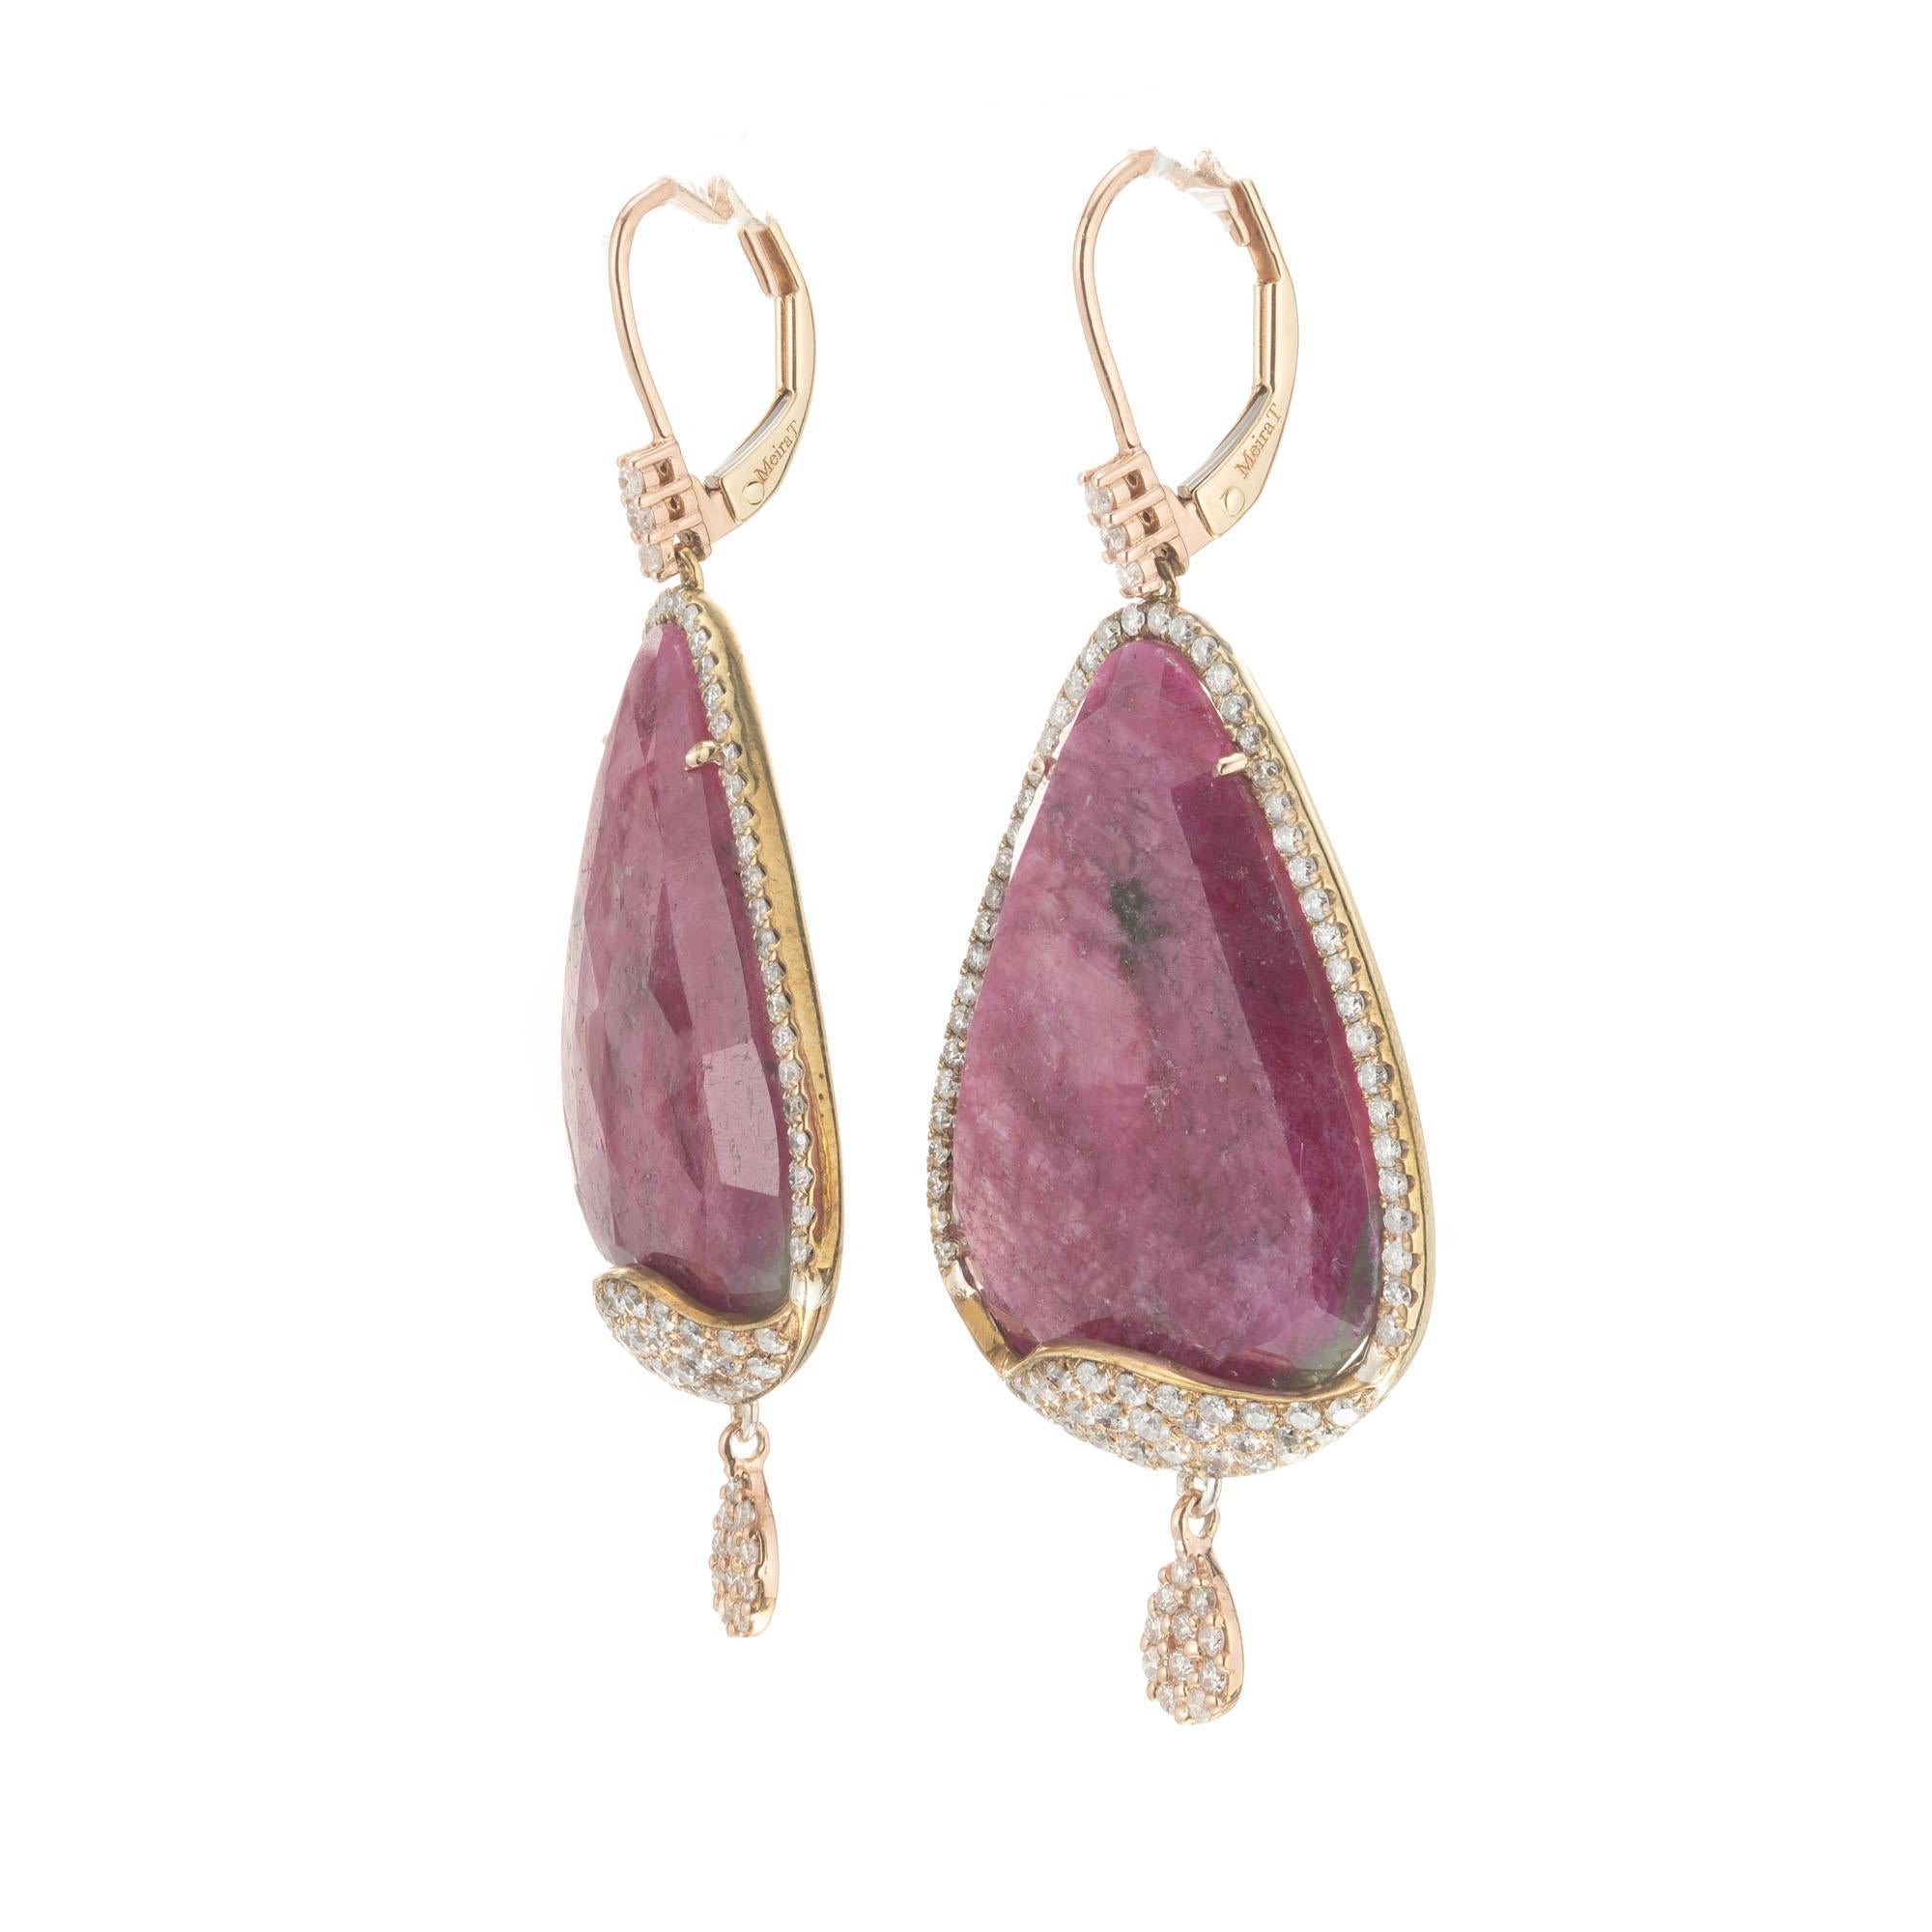 Meira T ruby and diamond dangle earrings. Natural 34.38ct ruby stones with 148 round diamonds set in 14k rose gold with pear shaped diamond cluster dangles. One ruby stone was randomly chose for testing by the GIA, certified natural, no heat stone.